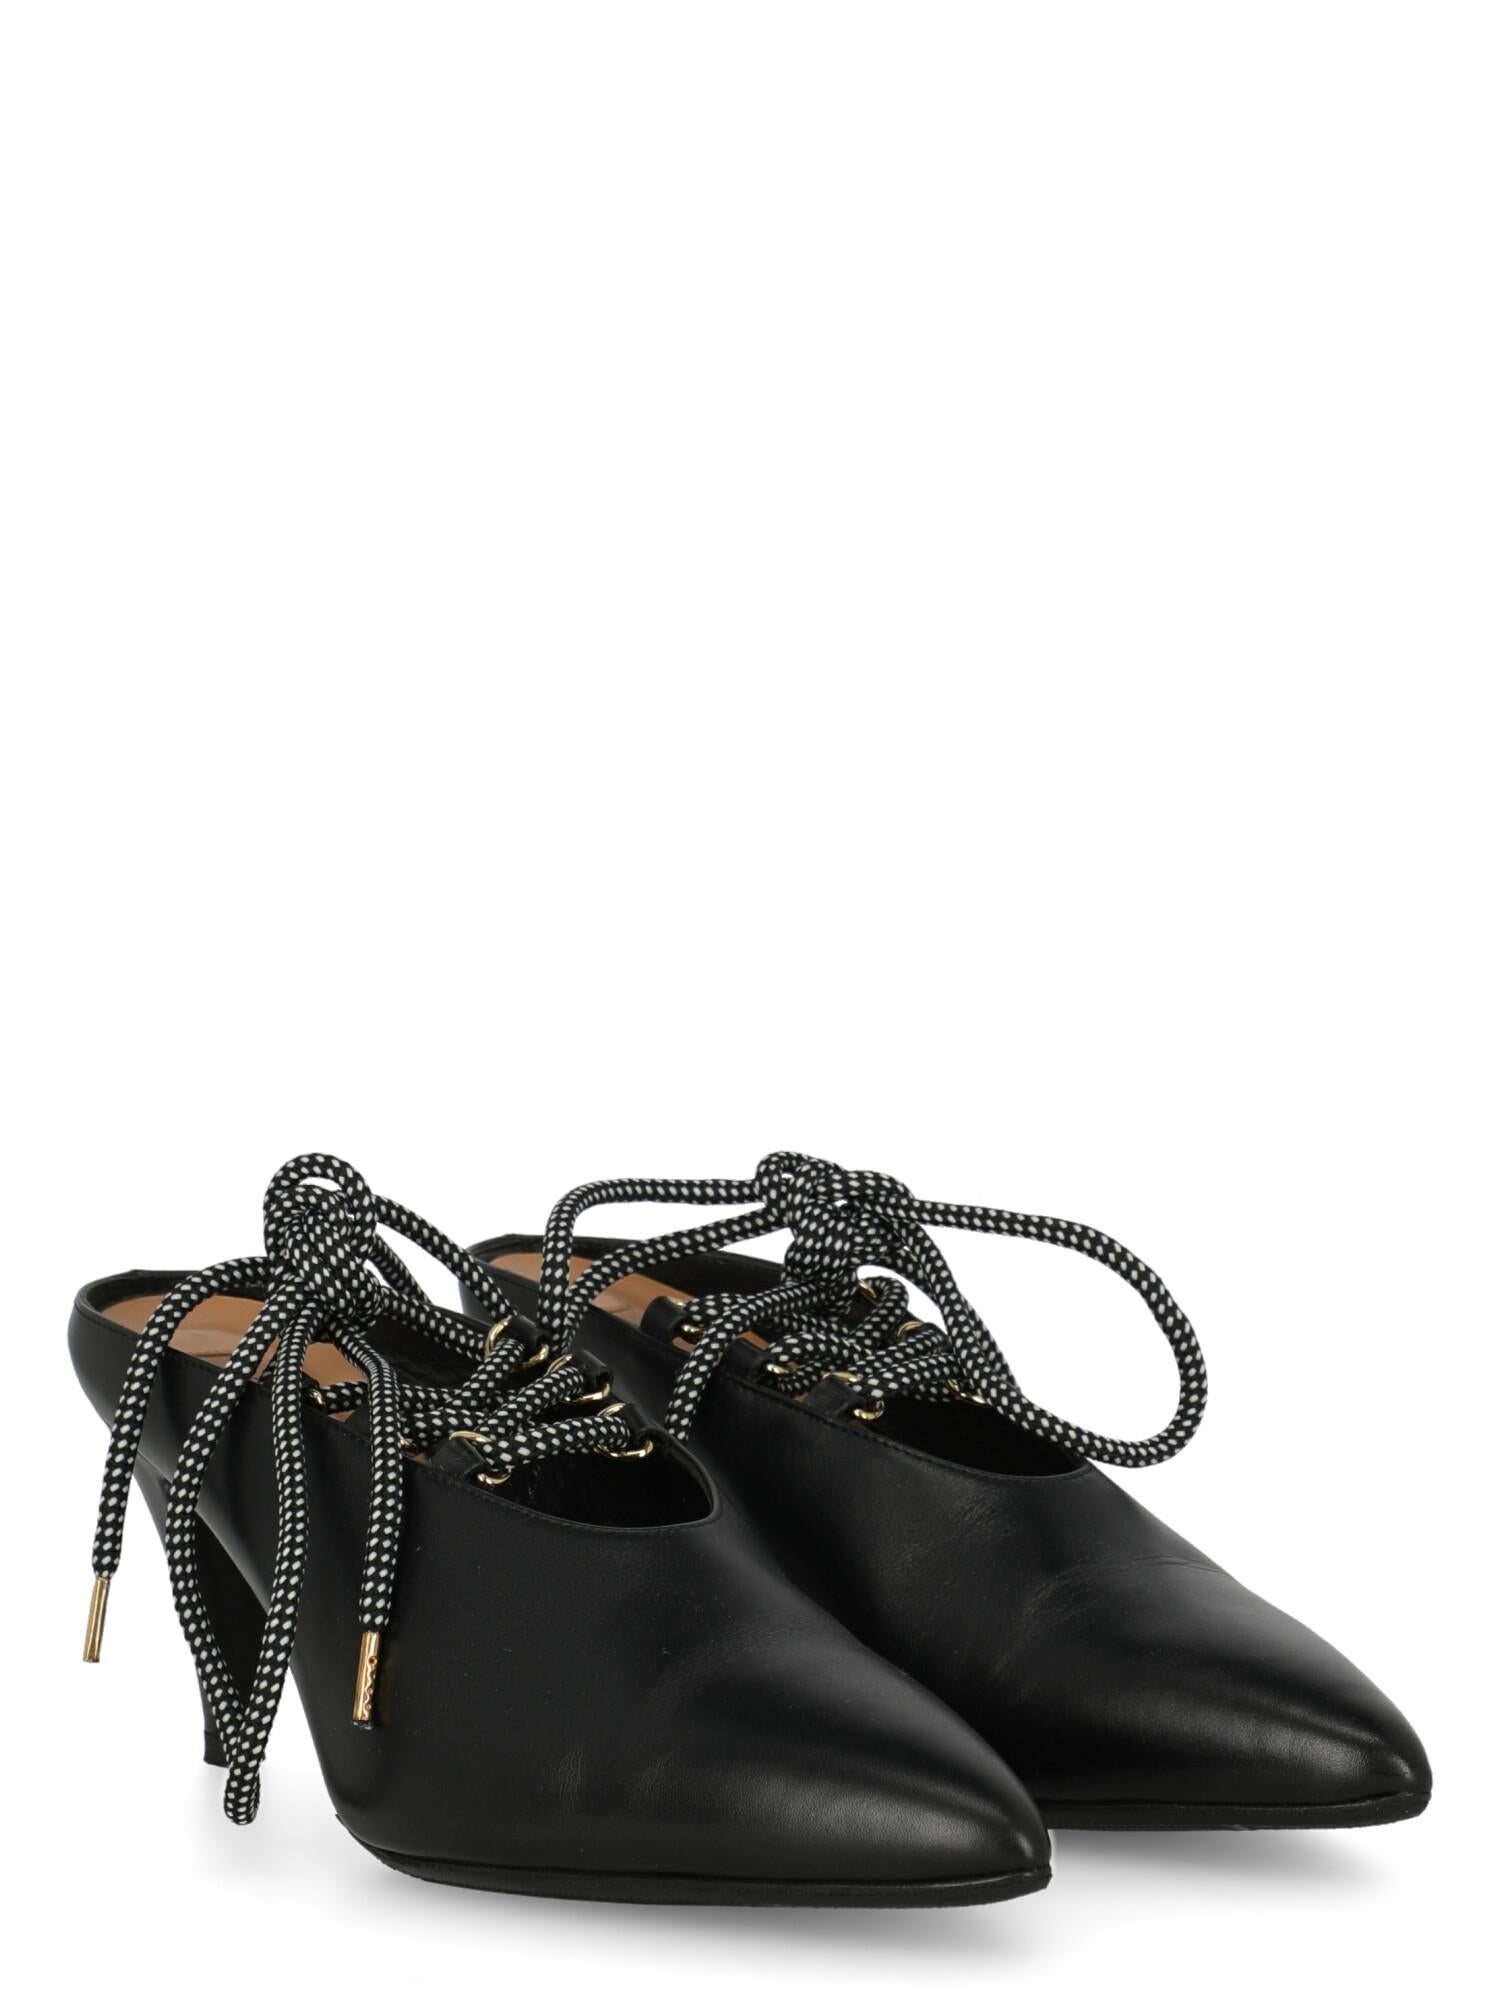 Shoe, leather, solid color, lace-up, pointed toe, branded insole, cone heel, mid heel.

Includes:
- Box

Product Condition: Very Good
Heel: negligible marks. Sole: partially substituted. Upper: negligible wrinkle.

Measurements:
Heel height: 8